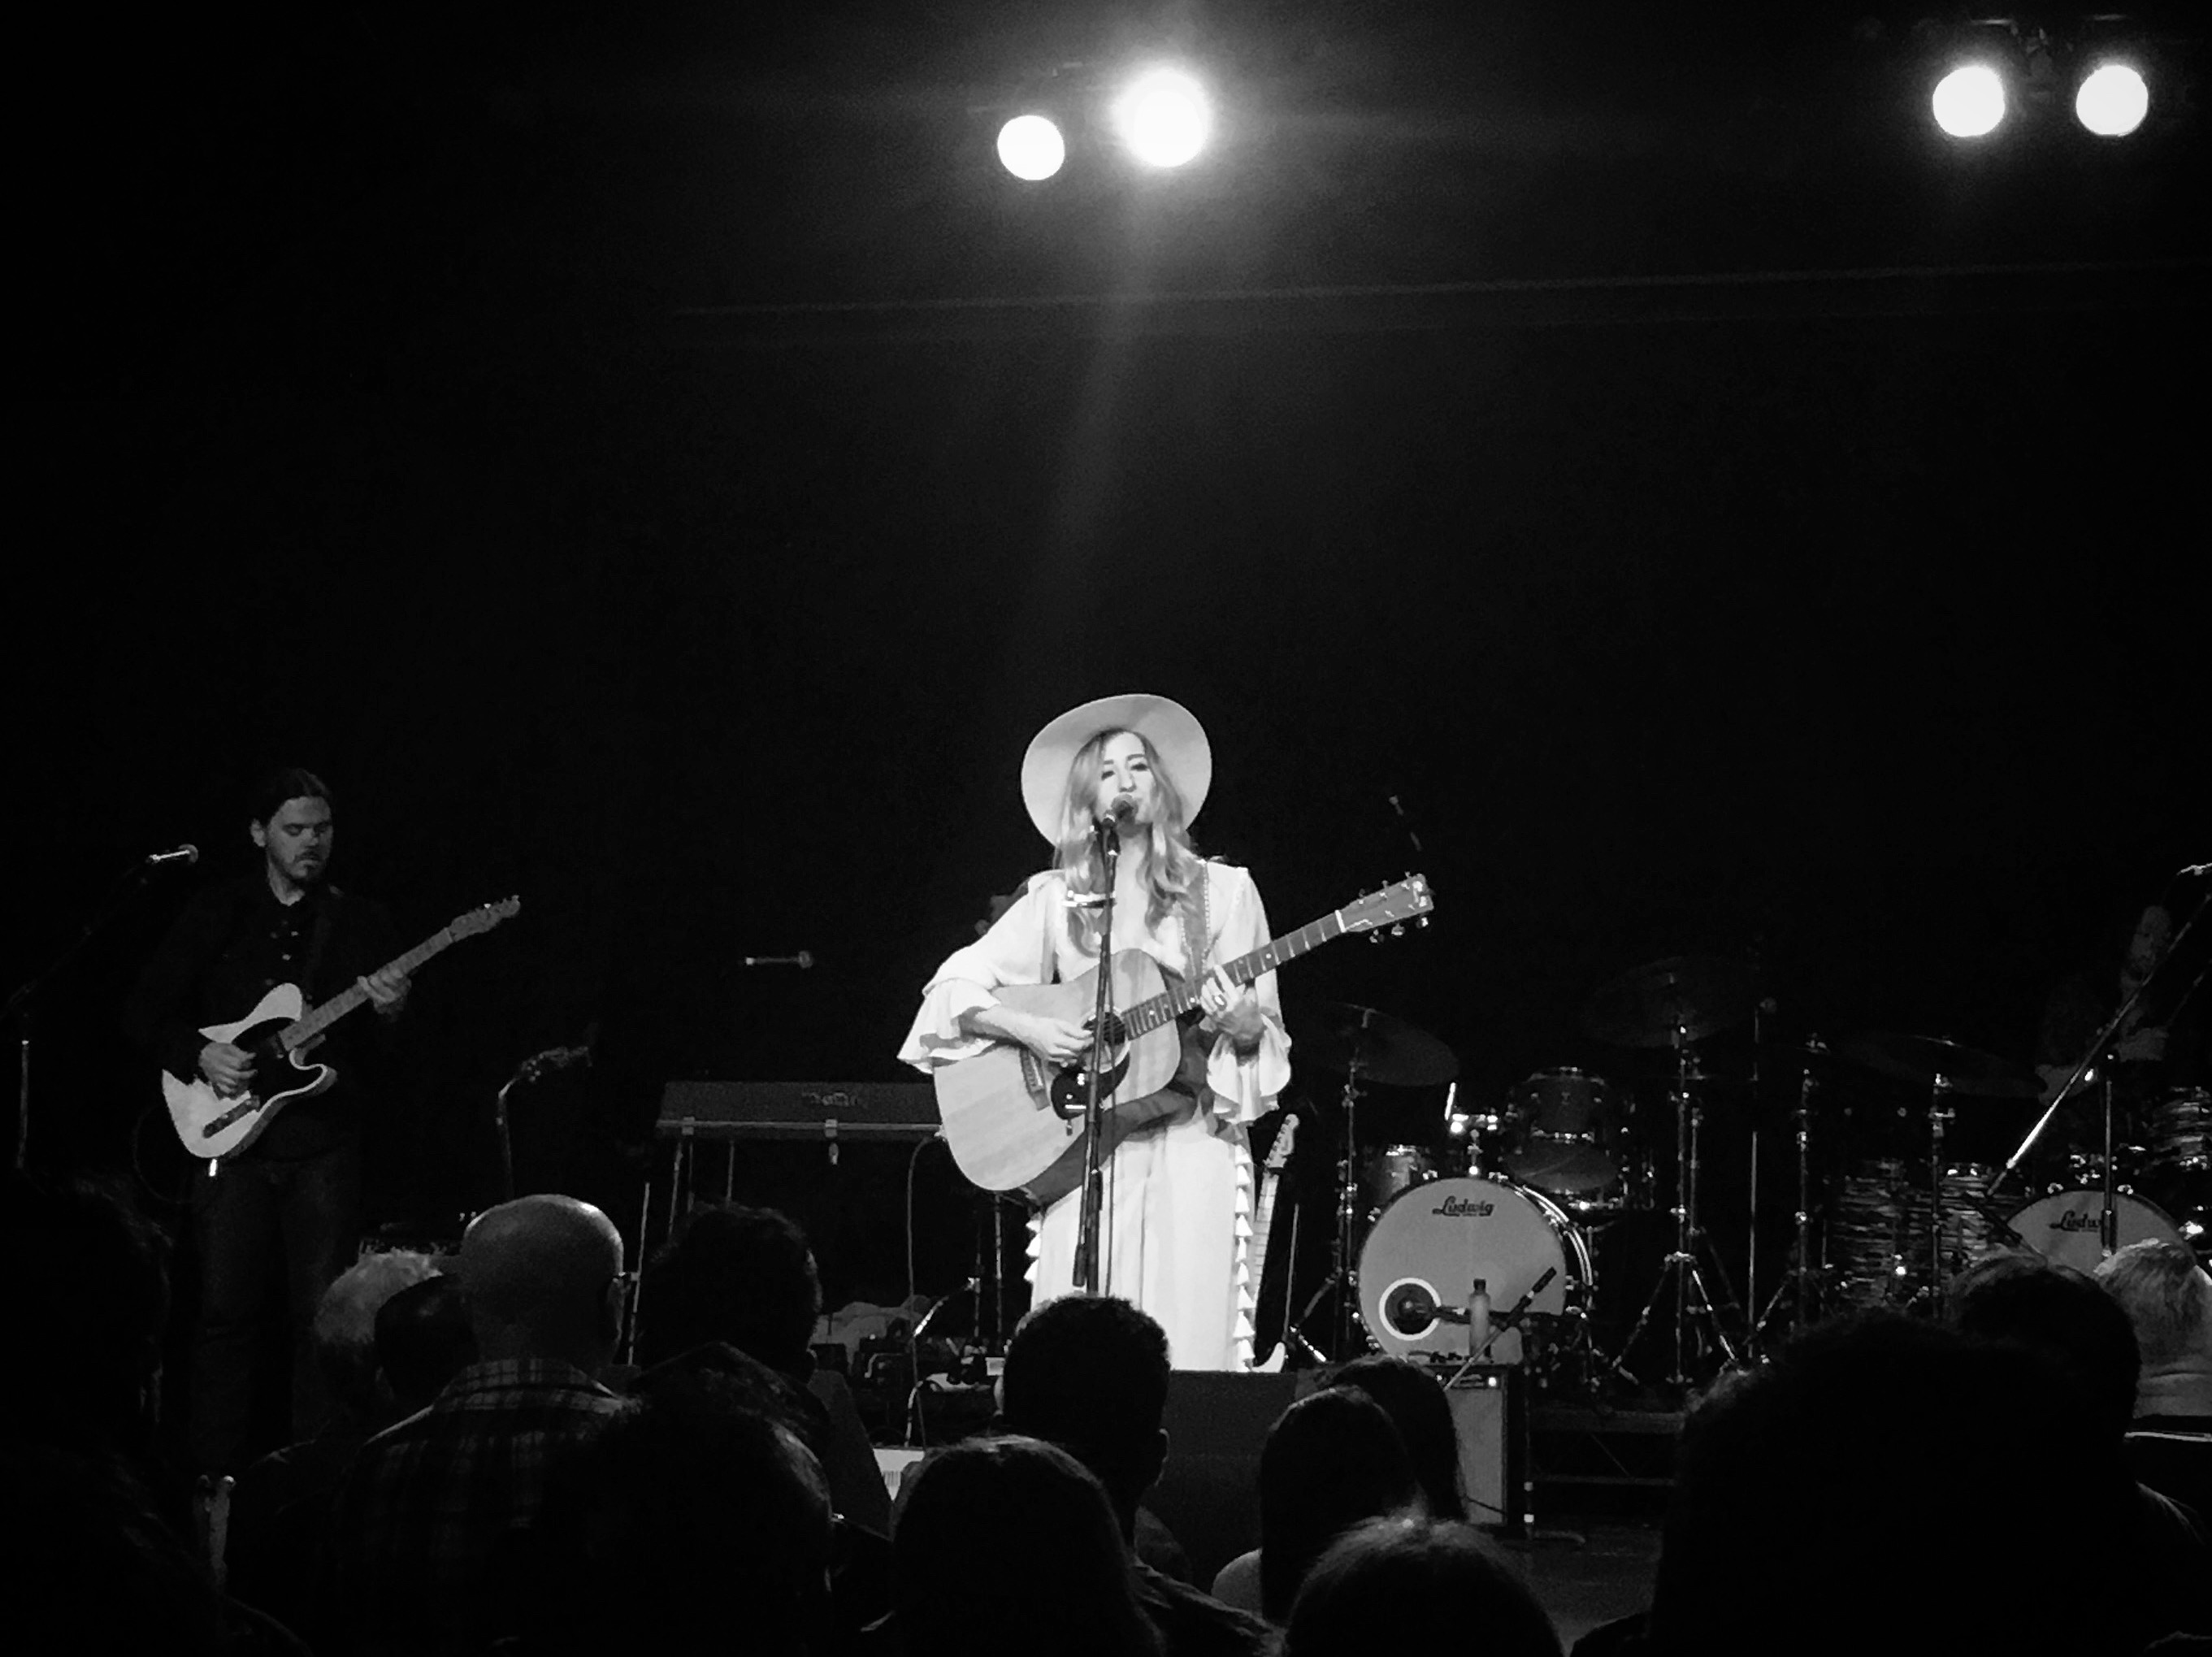 LIVE REVIEW: Margo Price, Courtney Marie Andrews, Sydney